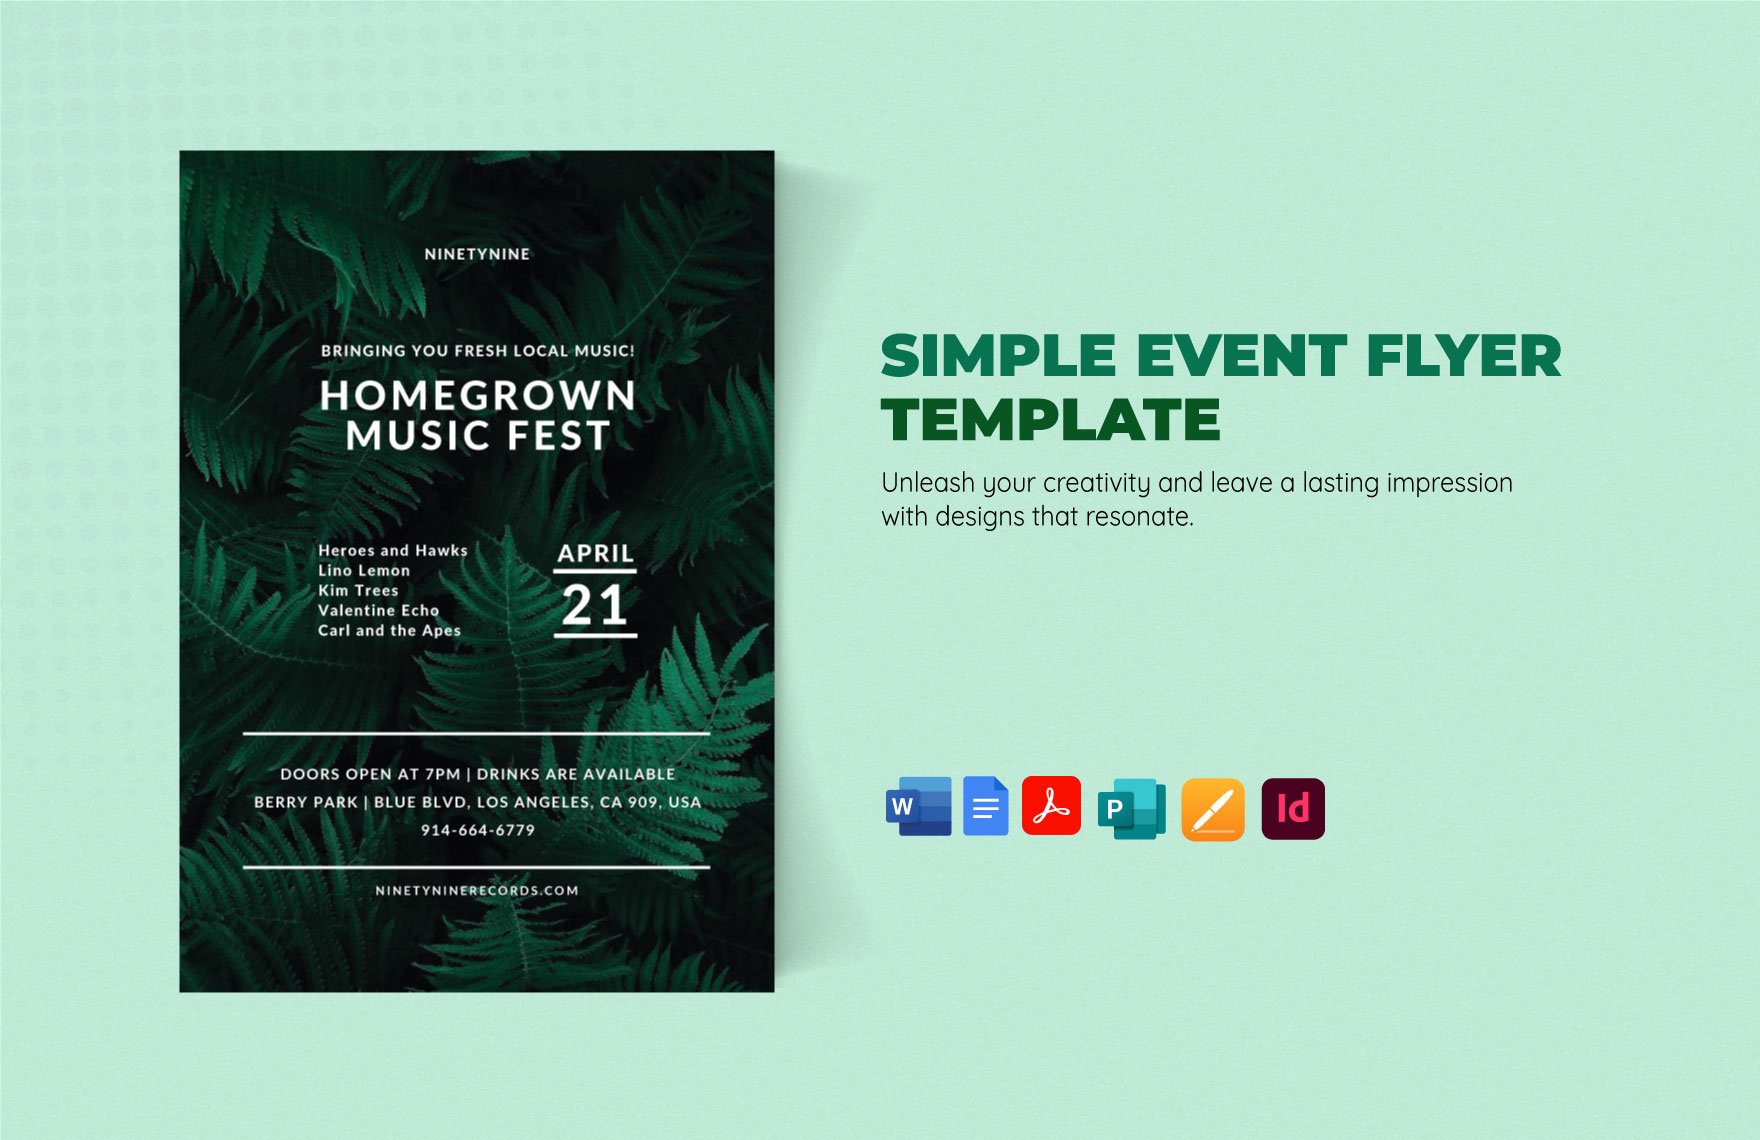 Simple Event Flyer Template